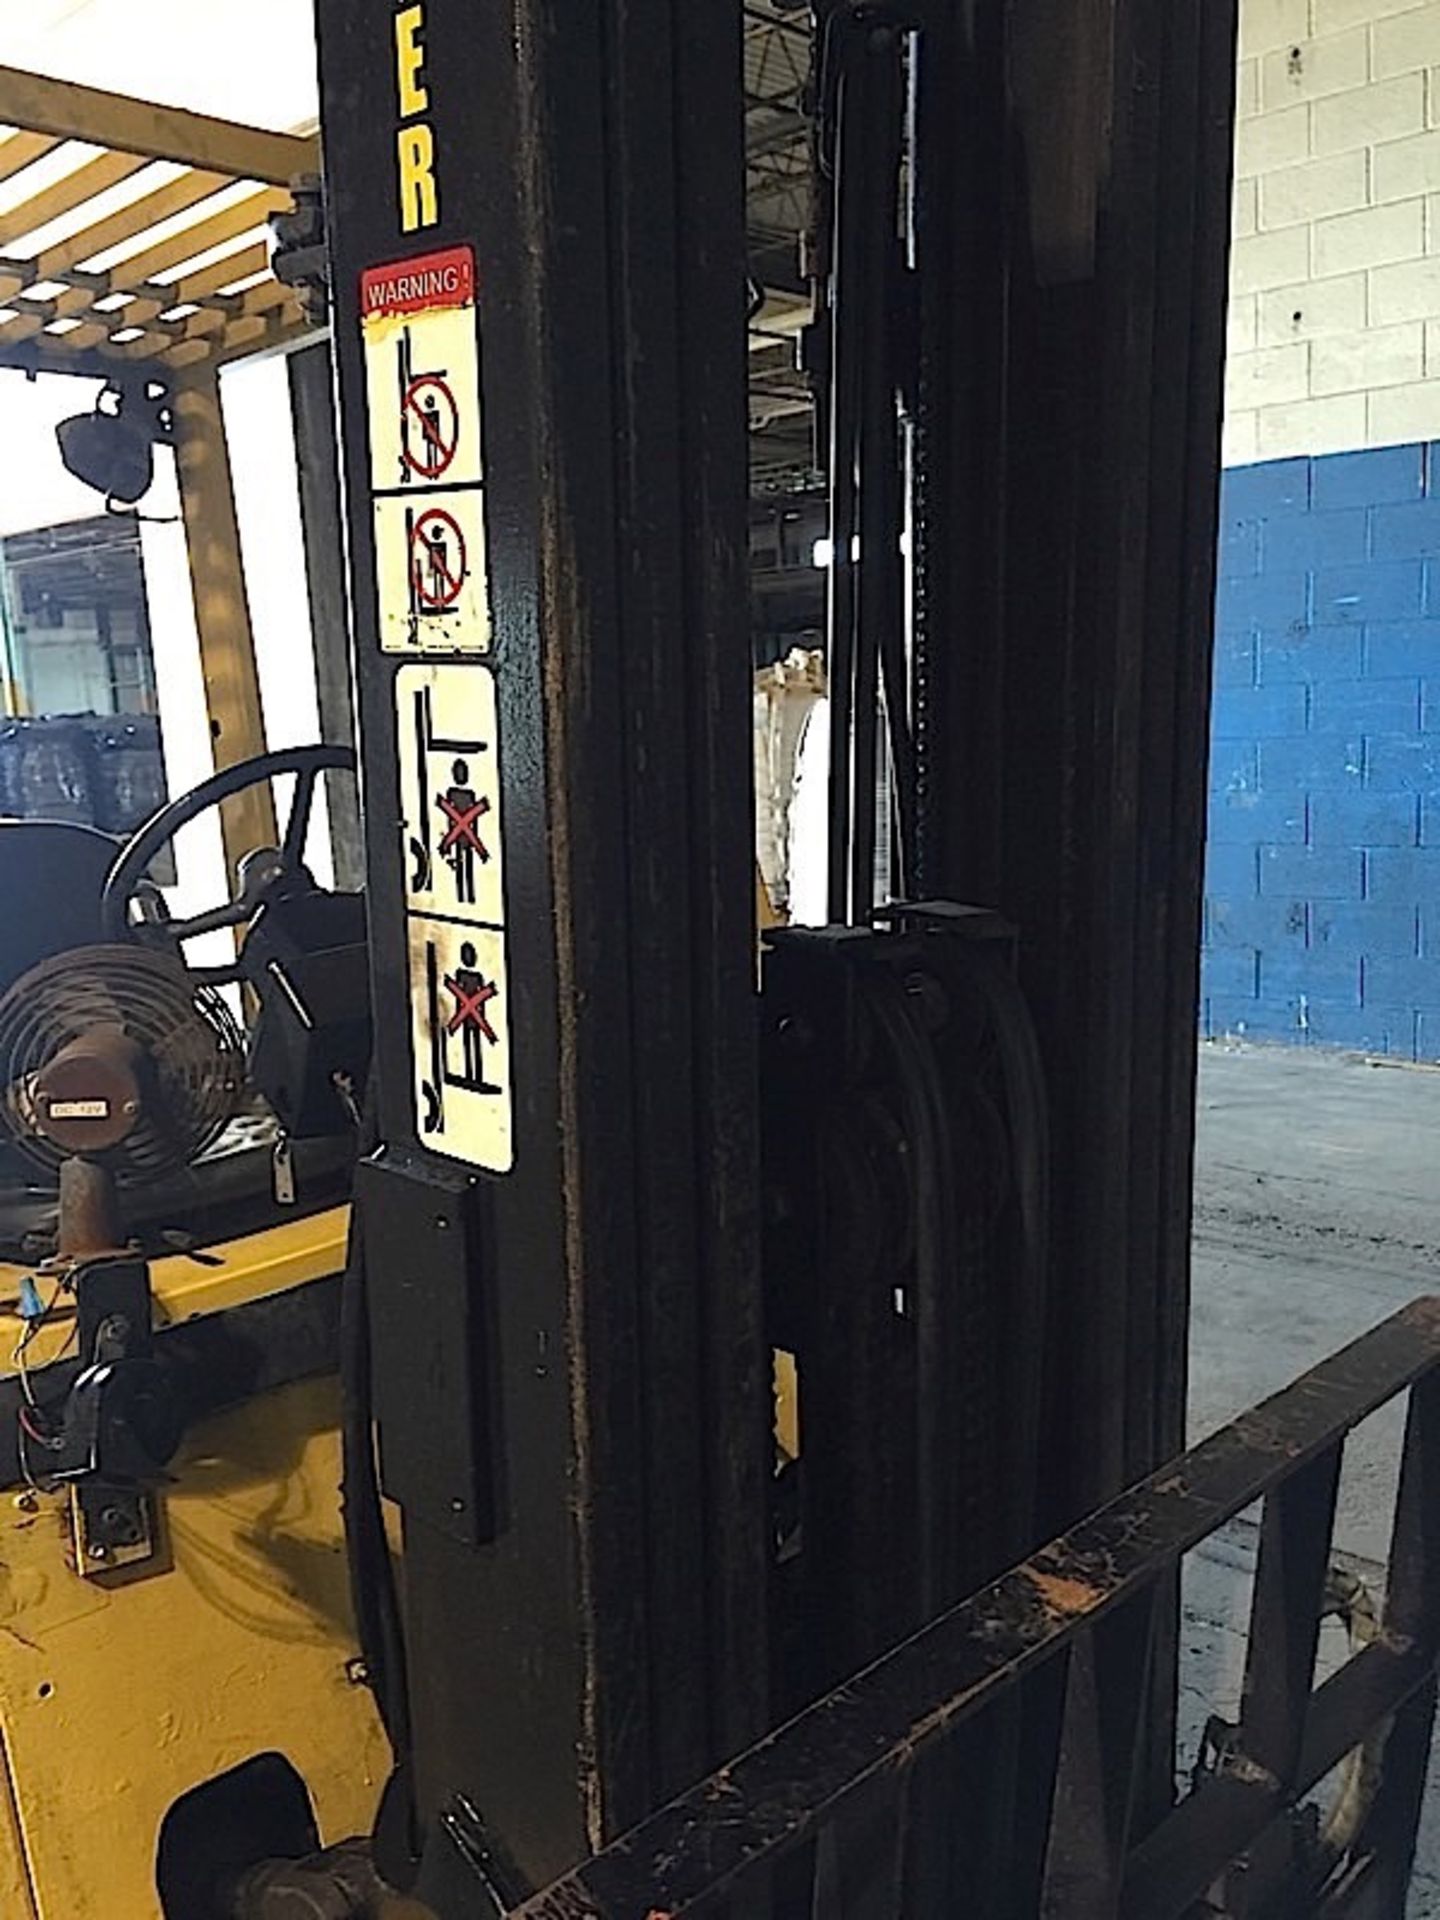 HYSTER (S50XM) FORKLIFT - 5,000 LBS CAPACITY, 3-STAGE, LPG WITH SIDE SHIFT - Image 2 of 4